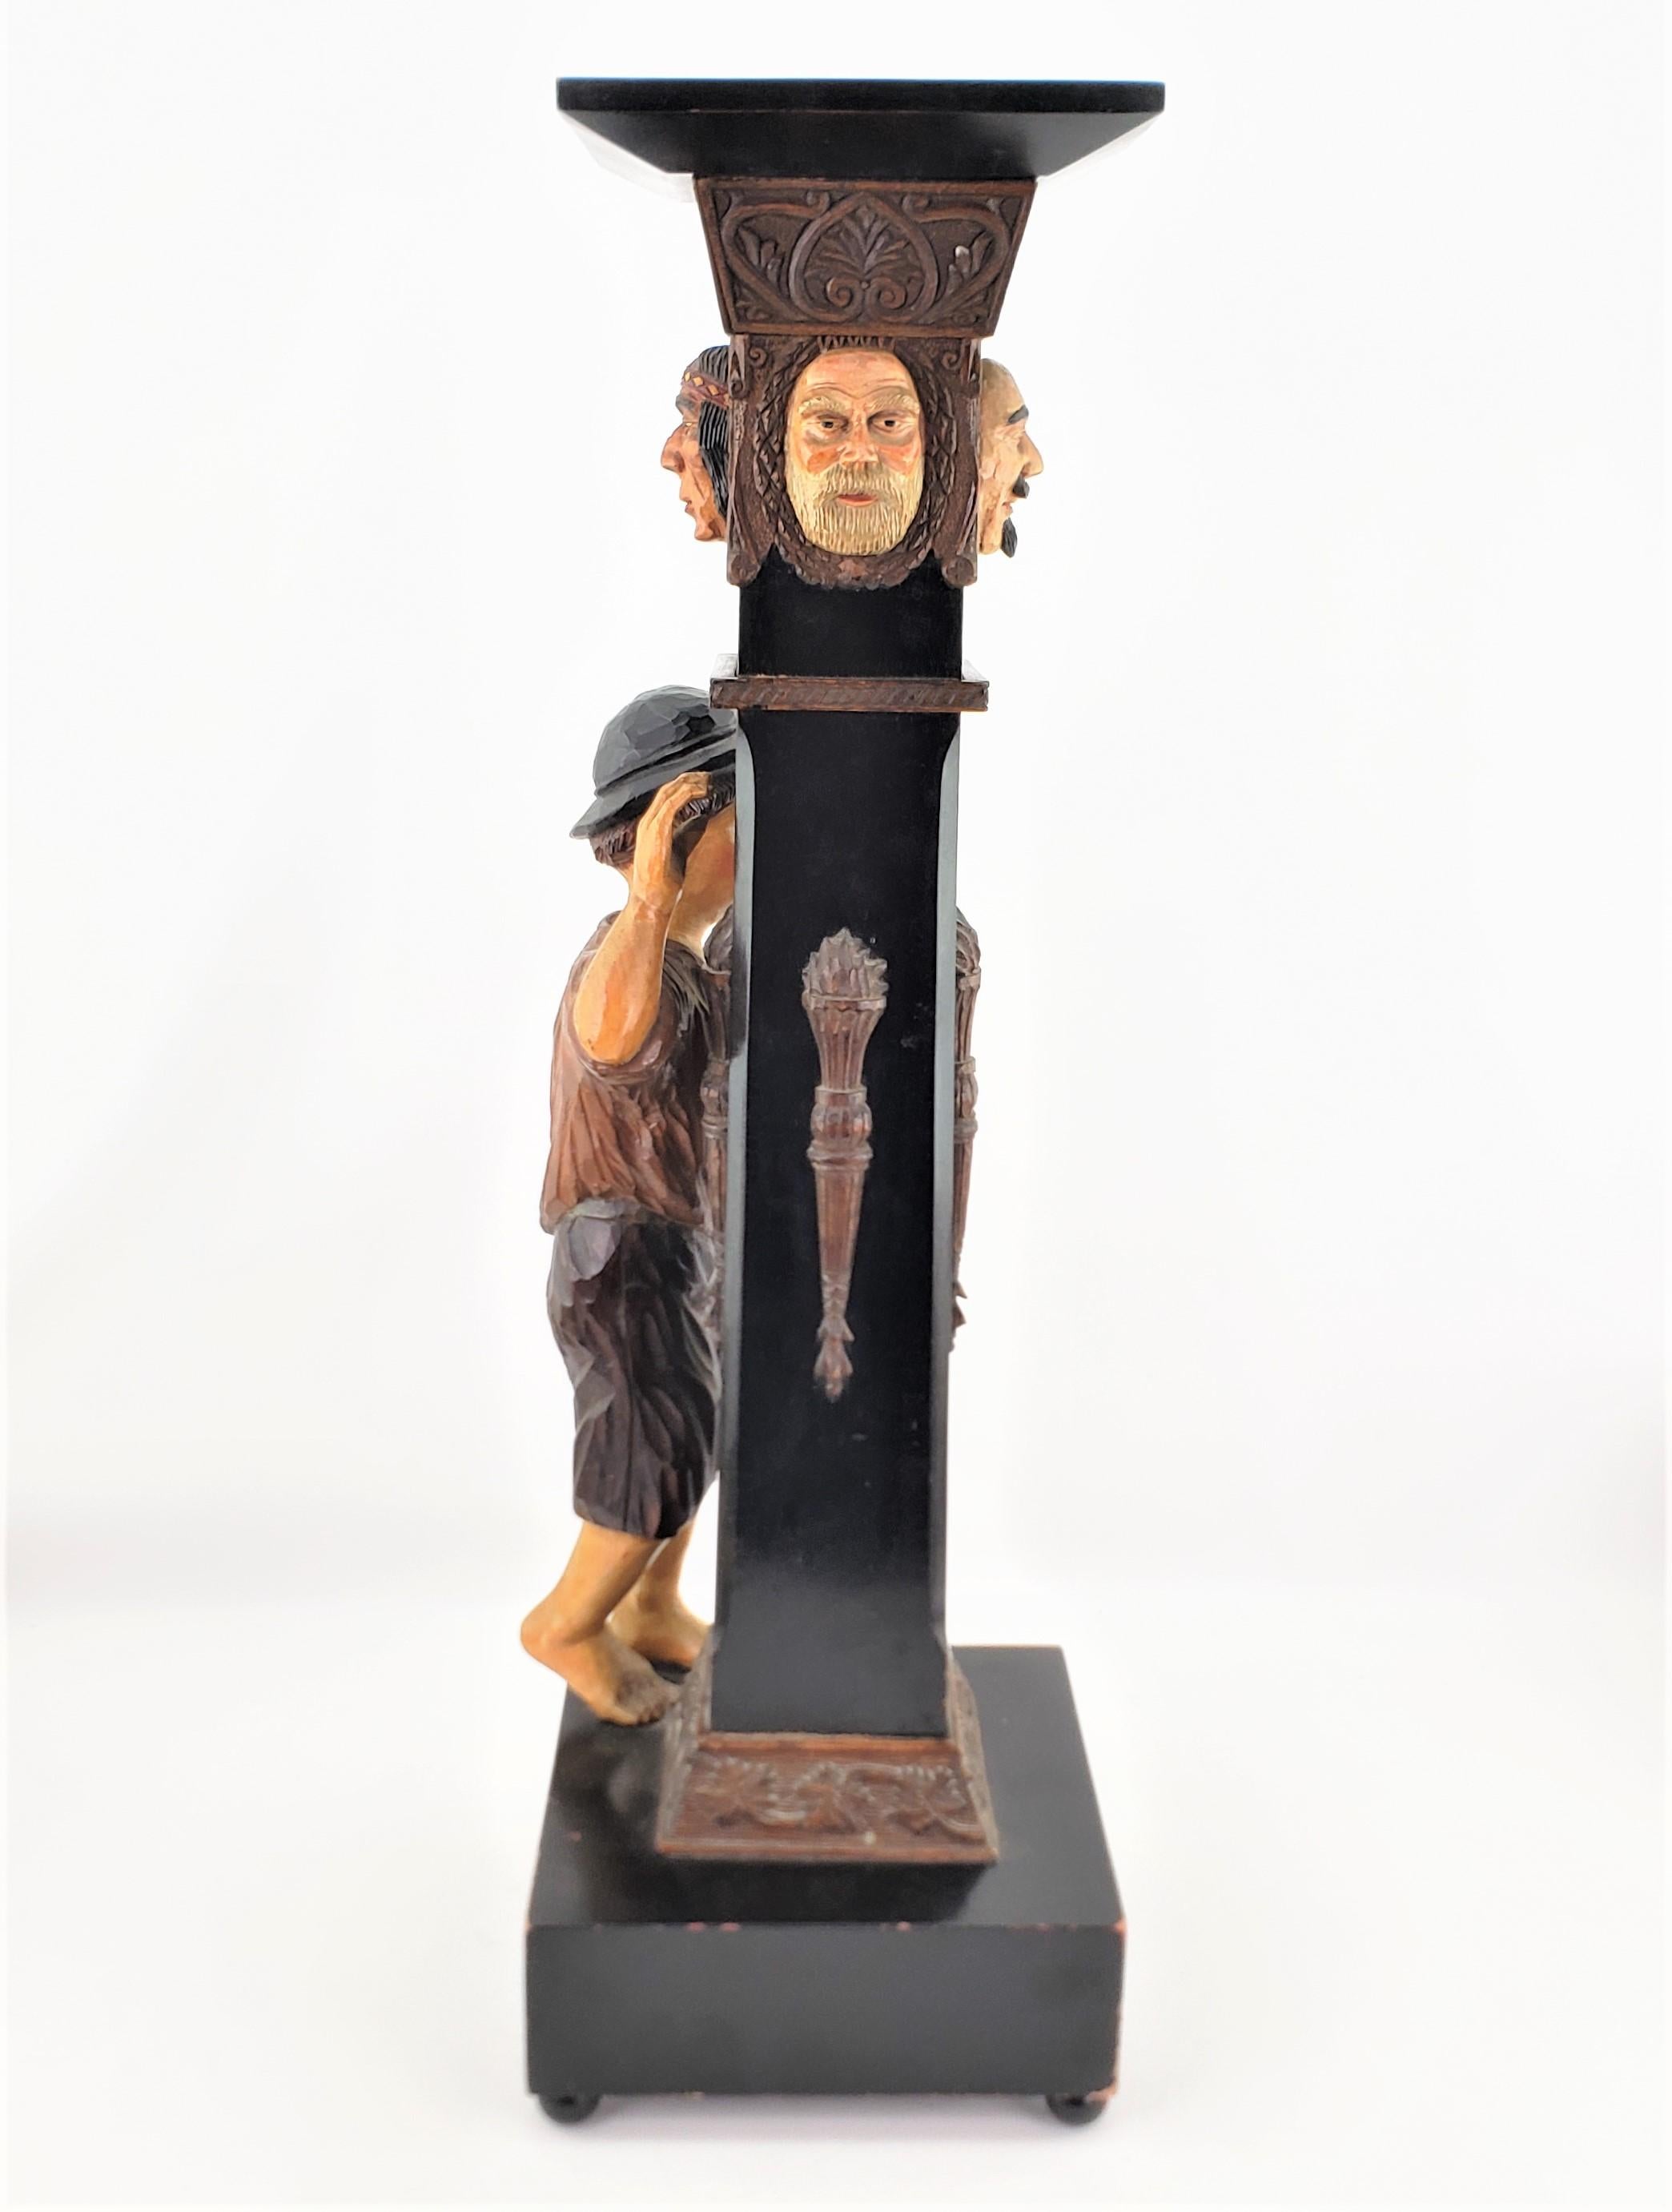 Softwood Antique Swiss or German Black Forest Styled Hand-Carved & Painted Pedestal For Sale